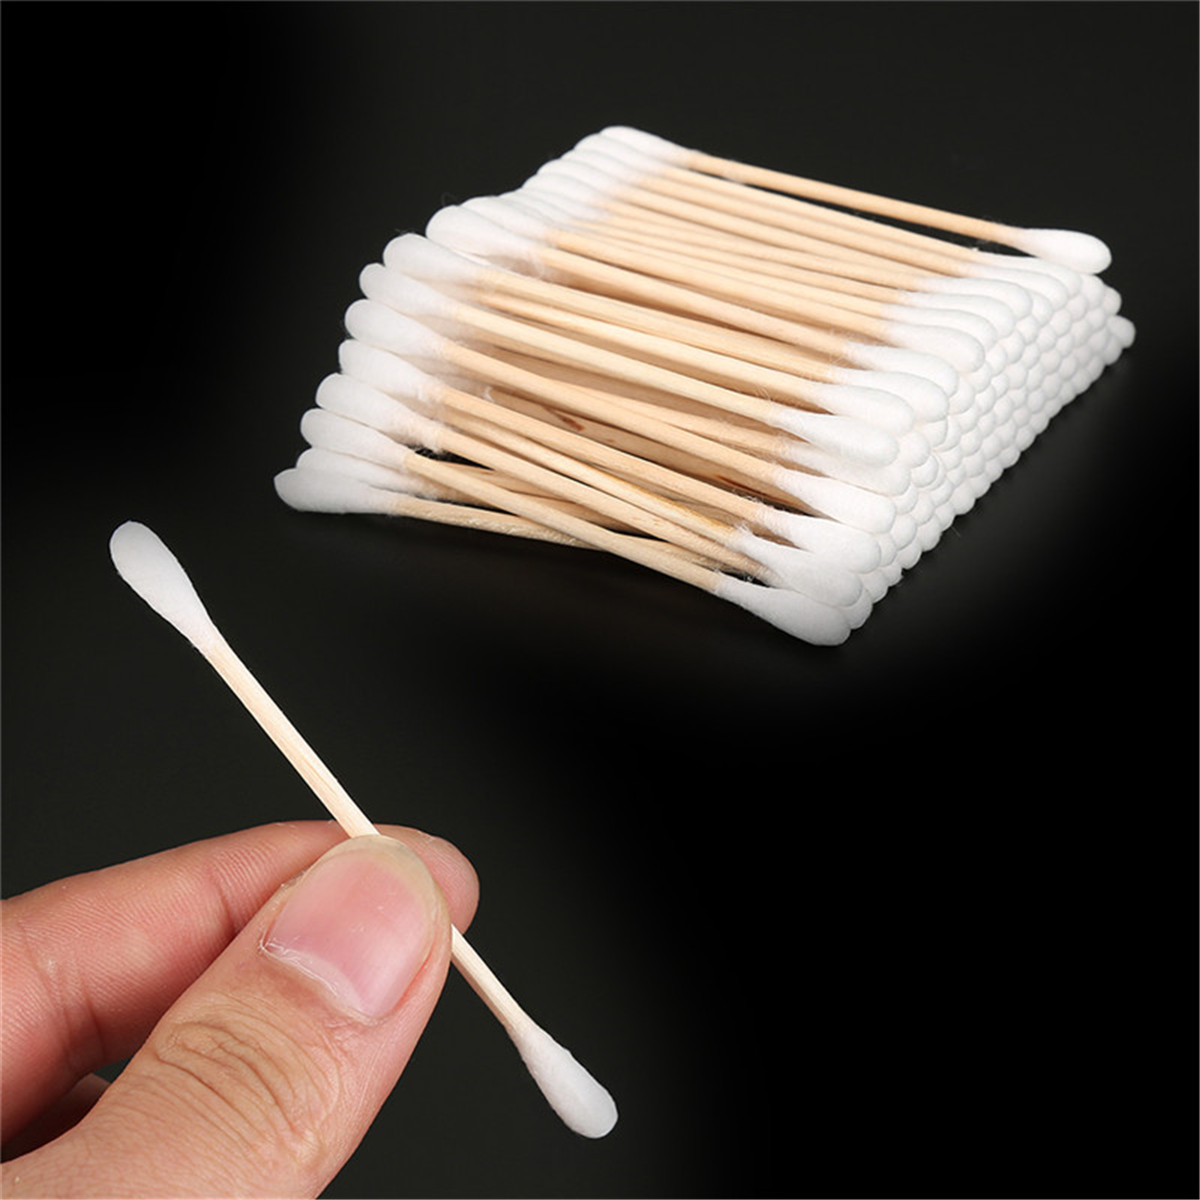 100x-Cotton-Swabs-Swab-Applicator-Q-Tips-Double-Head-Wooden-Stick-Cleaning-Tools-1582736-5